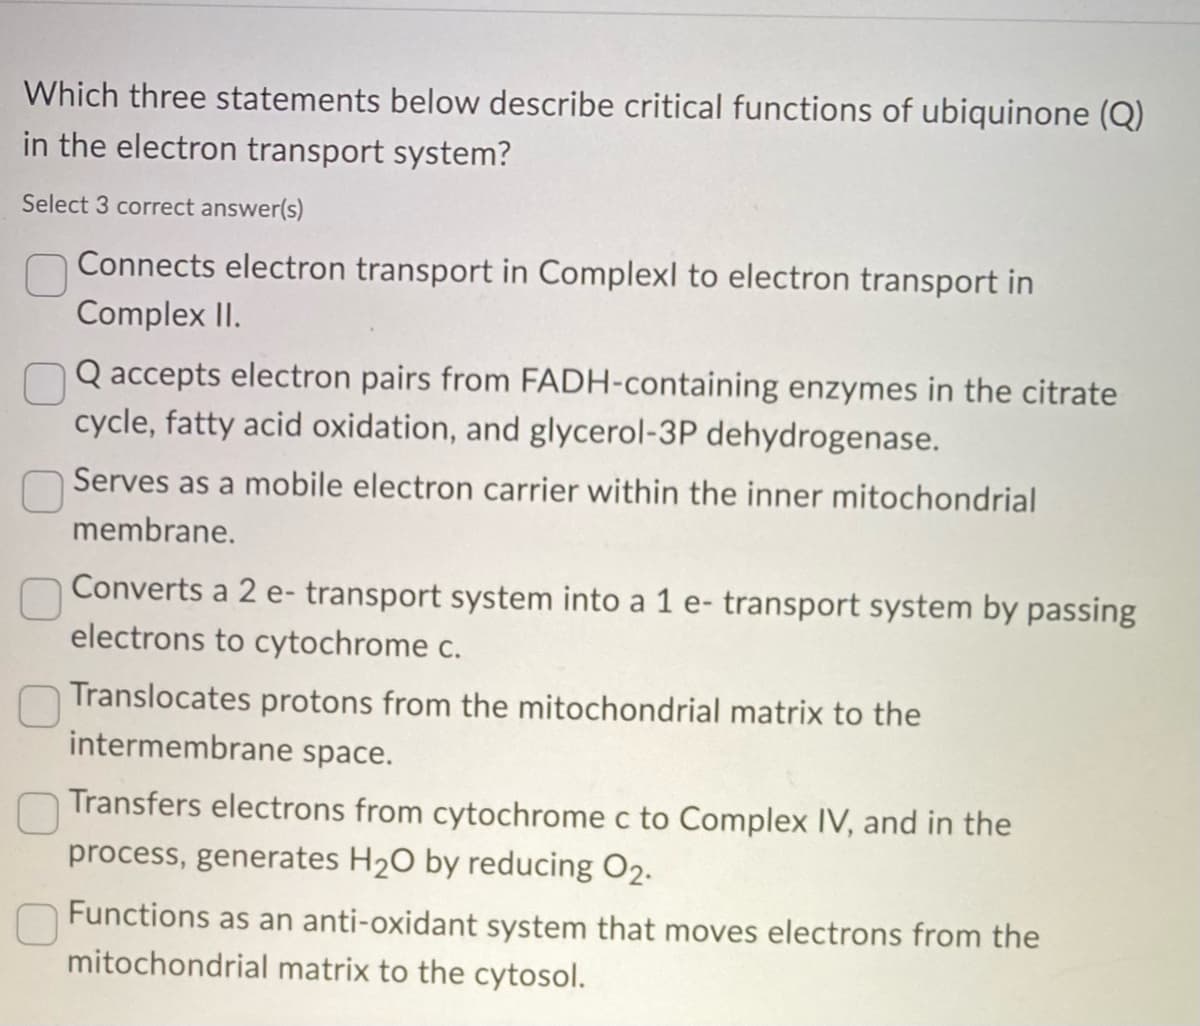 Which three statements below describe critical functions of ubiquinone (Q)
in the electron transport system?
Select 3 correct answer(s)
Connects electron transport in Complexl to electron transport in
Complex II.
Q accepts electron pairs from FADH-containing enzymes in the citrate
cycle, fatty acid oxidation, and glycerol-3P dehydrogenase.
Serves as a mobile electron carrier within the inner mitochondrial
membrane.
Converts a 2 e- transport system into a 1 e- transport system by passing
electrons to cytochrome c.
Translocates protons from the mitochondrial matrix to the
intermembrane space.
Transfers electrons from cytochrome c to Complex IV, and in the
process, generates H₂O by reducing 02.
0
Functions as an anti-oxidant system that moves electrons from the
mitochondrial matrix to the cytosol.